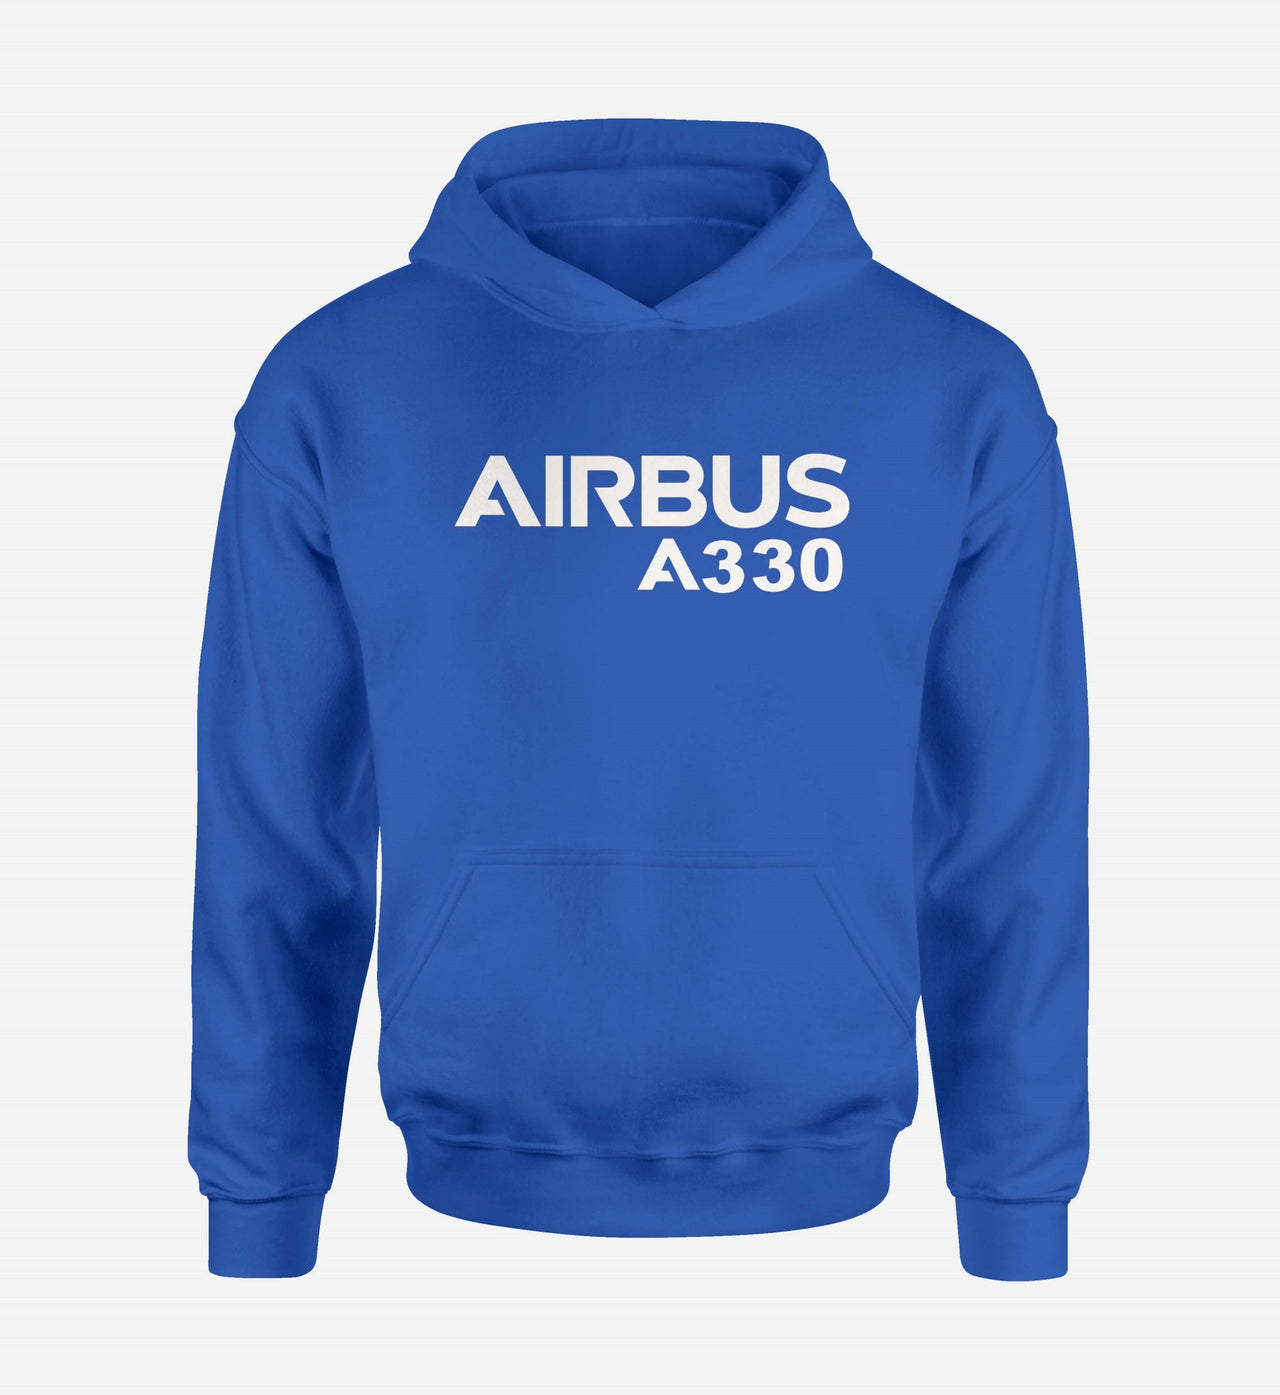 Airbus A330 & Text Designed Hoodies